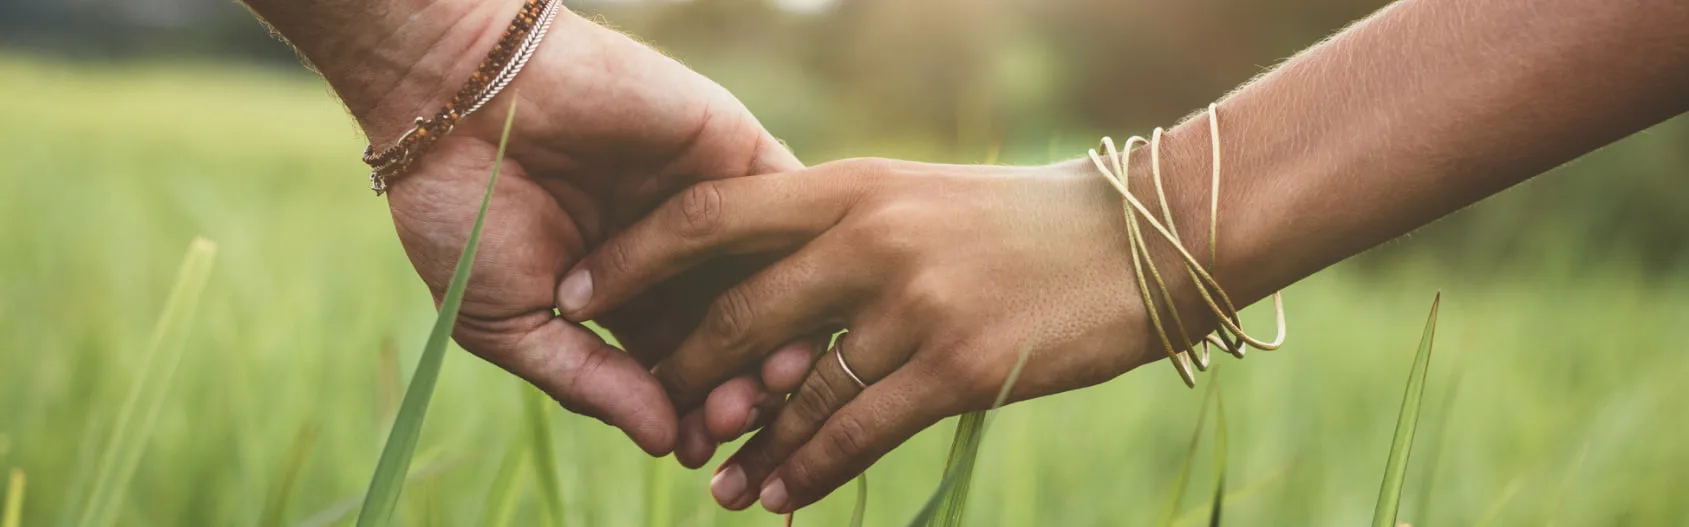 Can you be addicted to a person? - an image close up of two people holding hands with green nature scenery in the background